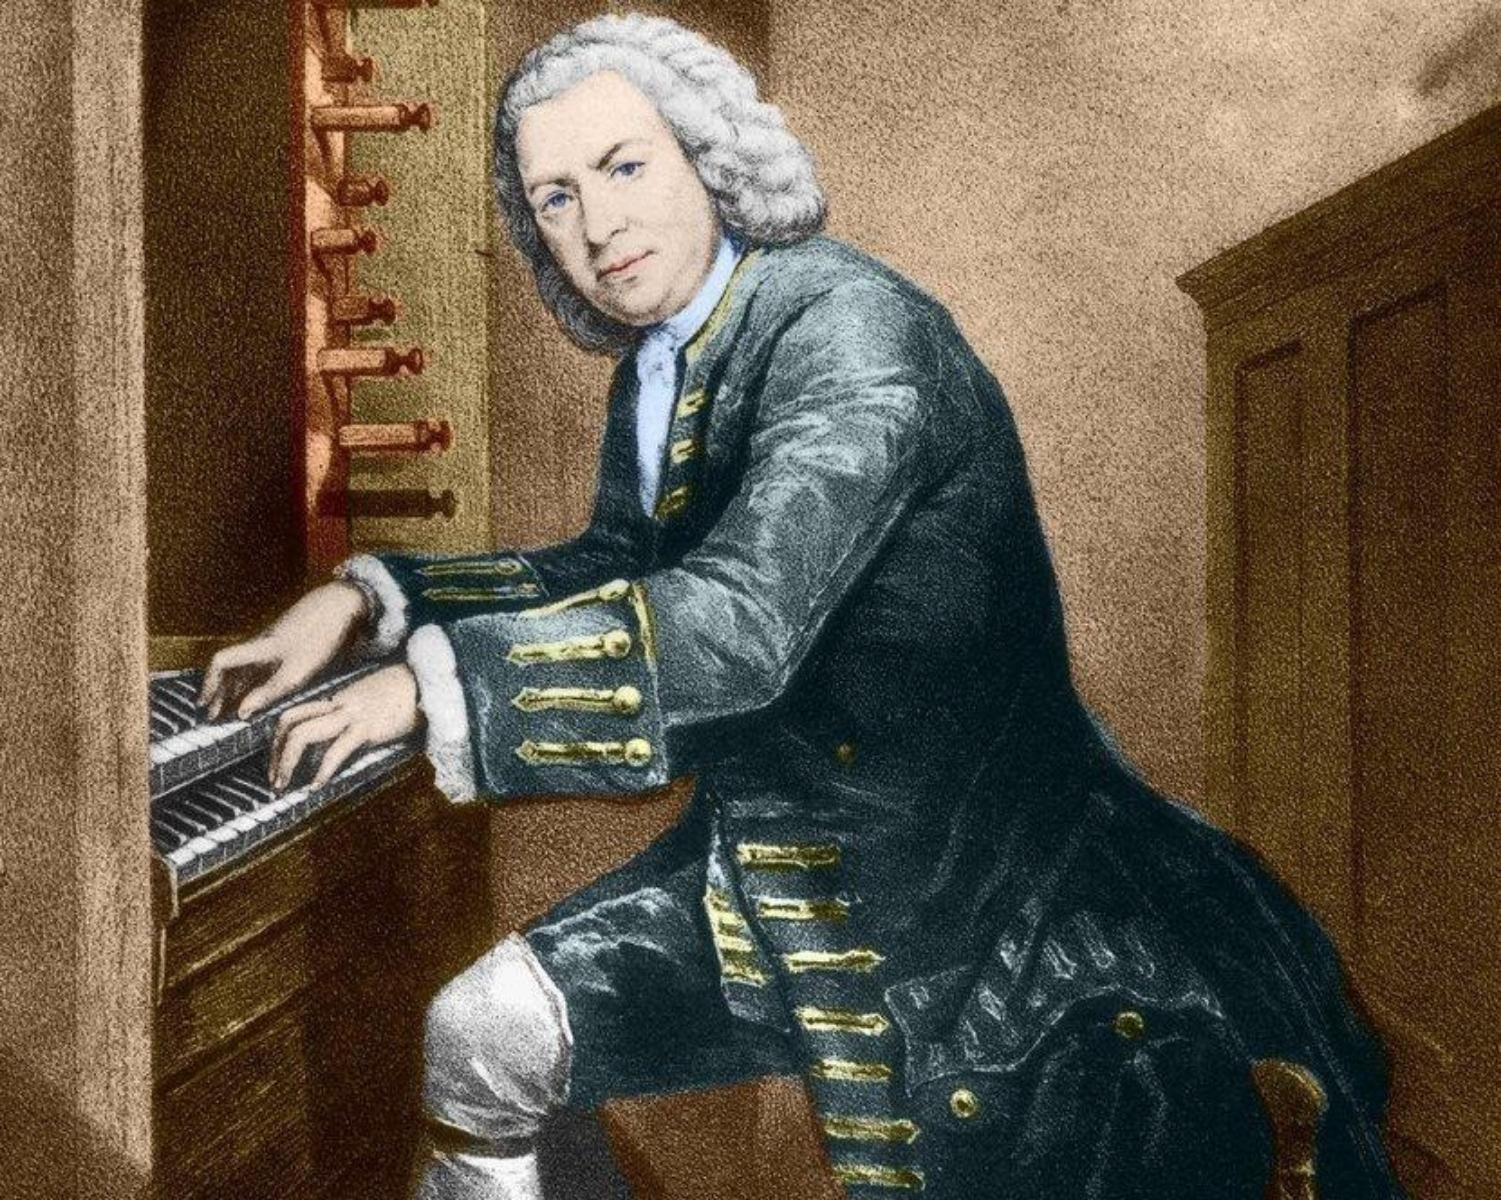 How many pieces did Bach write in his lifetime?